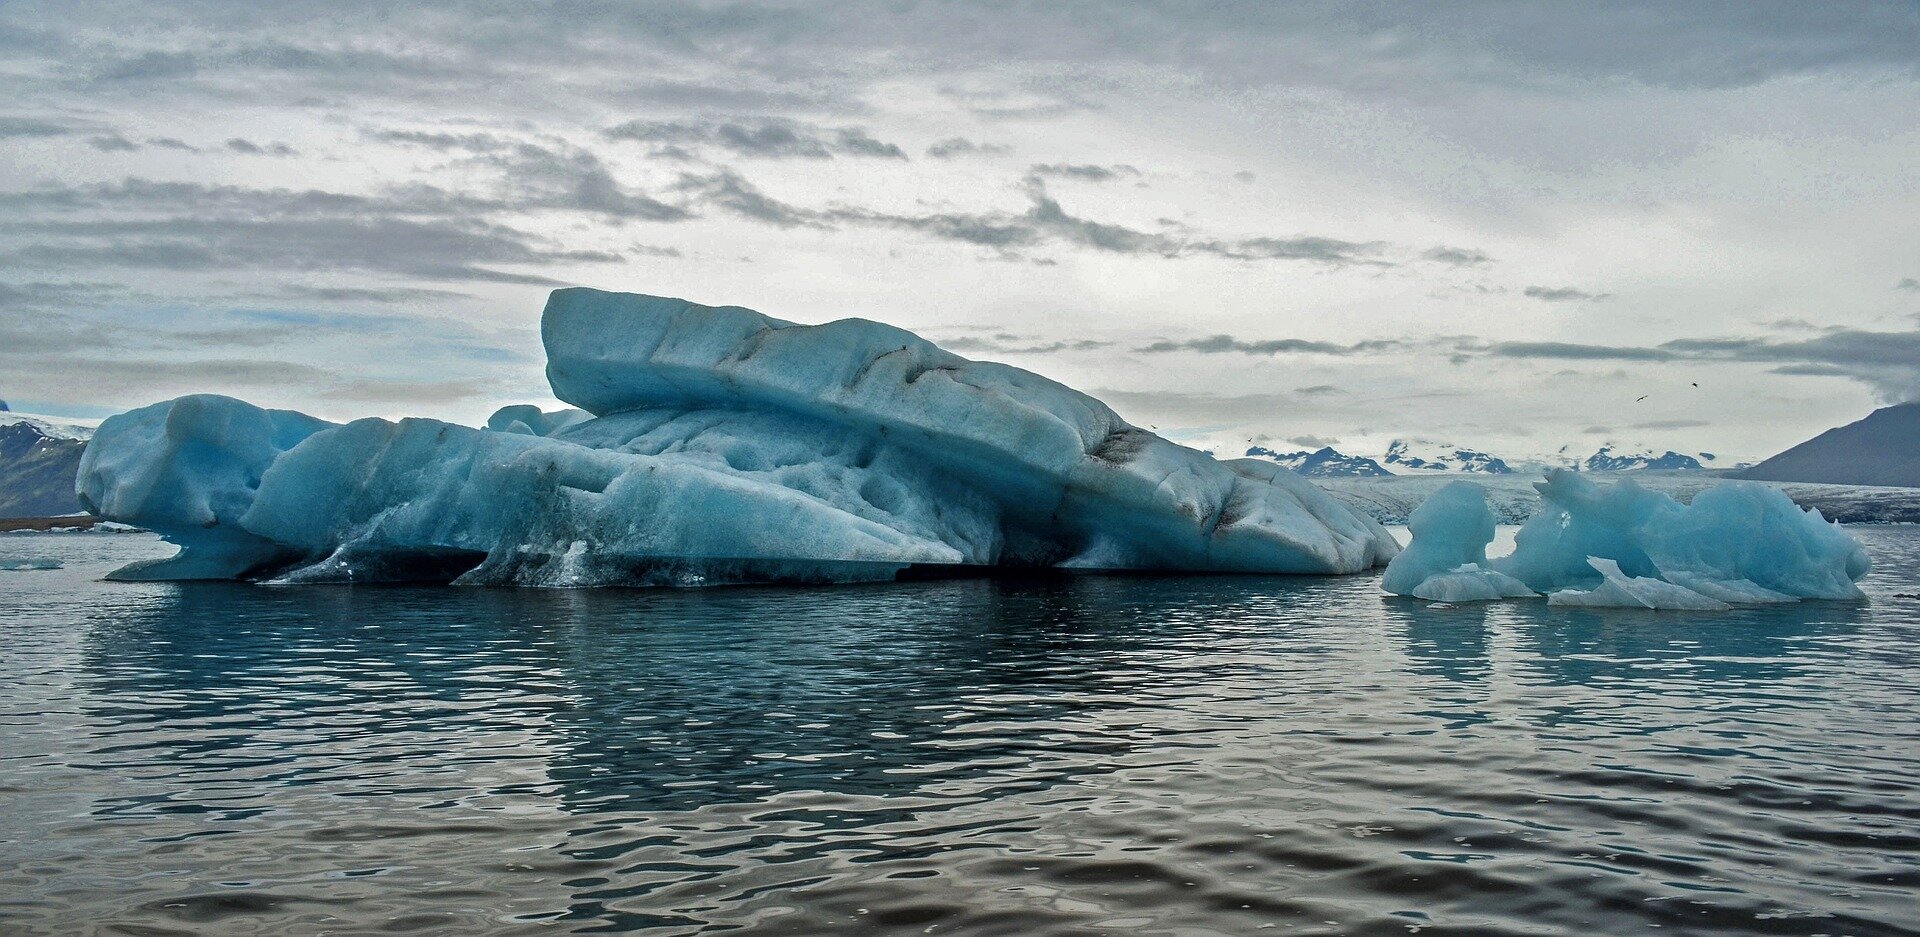 Arctic temperatures are increasing four times faster than global warming